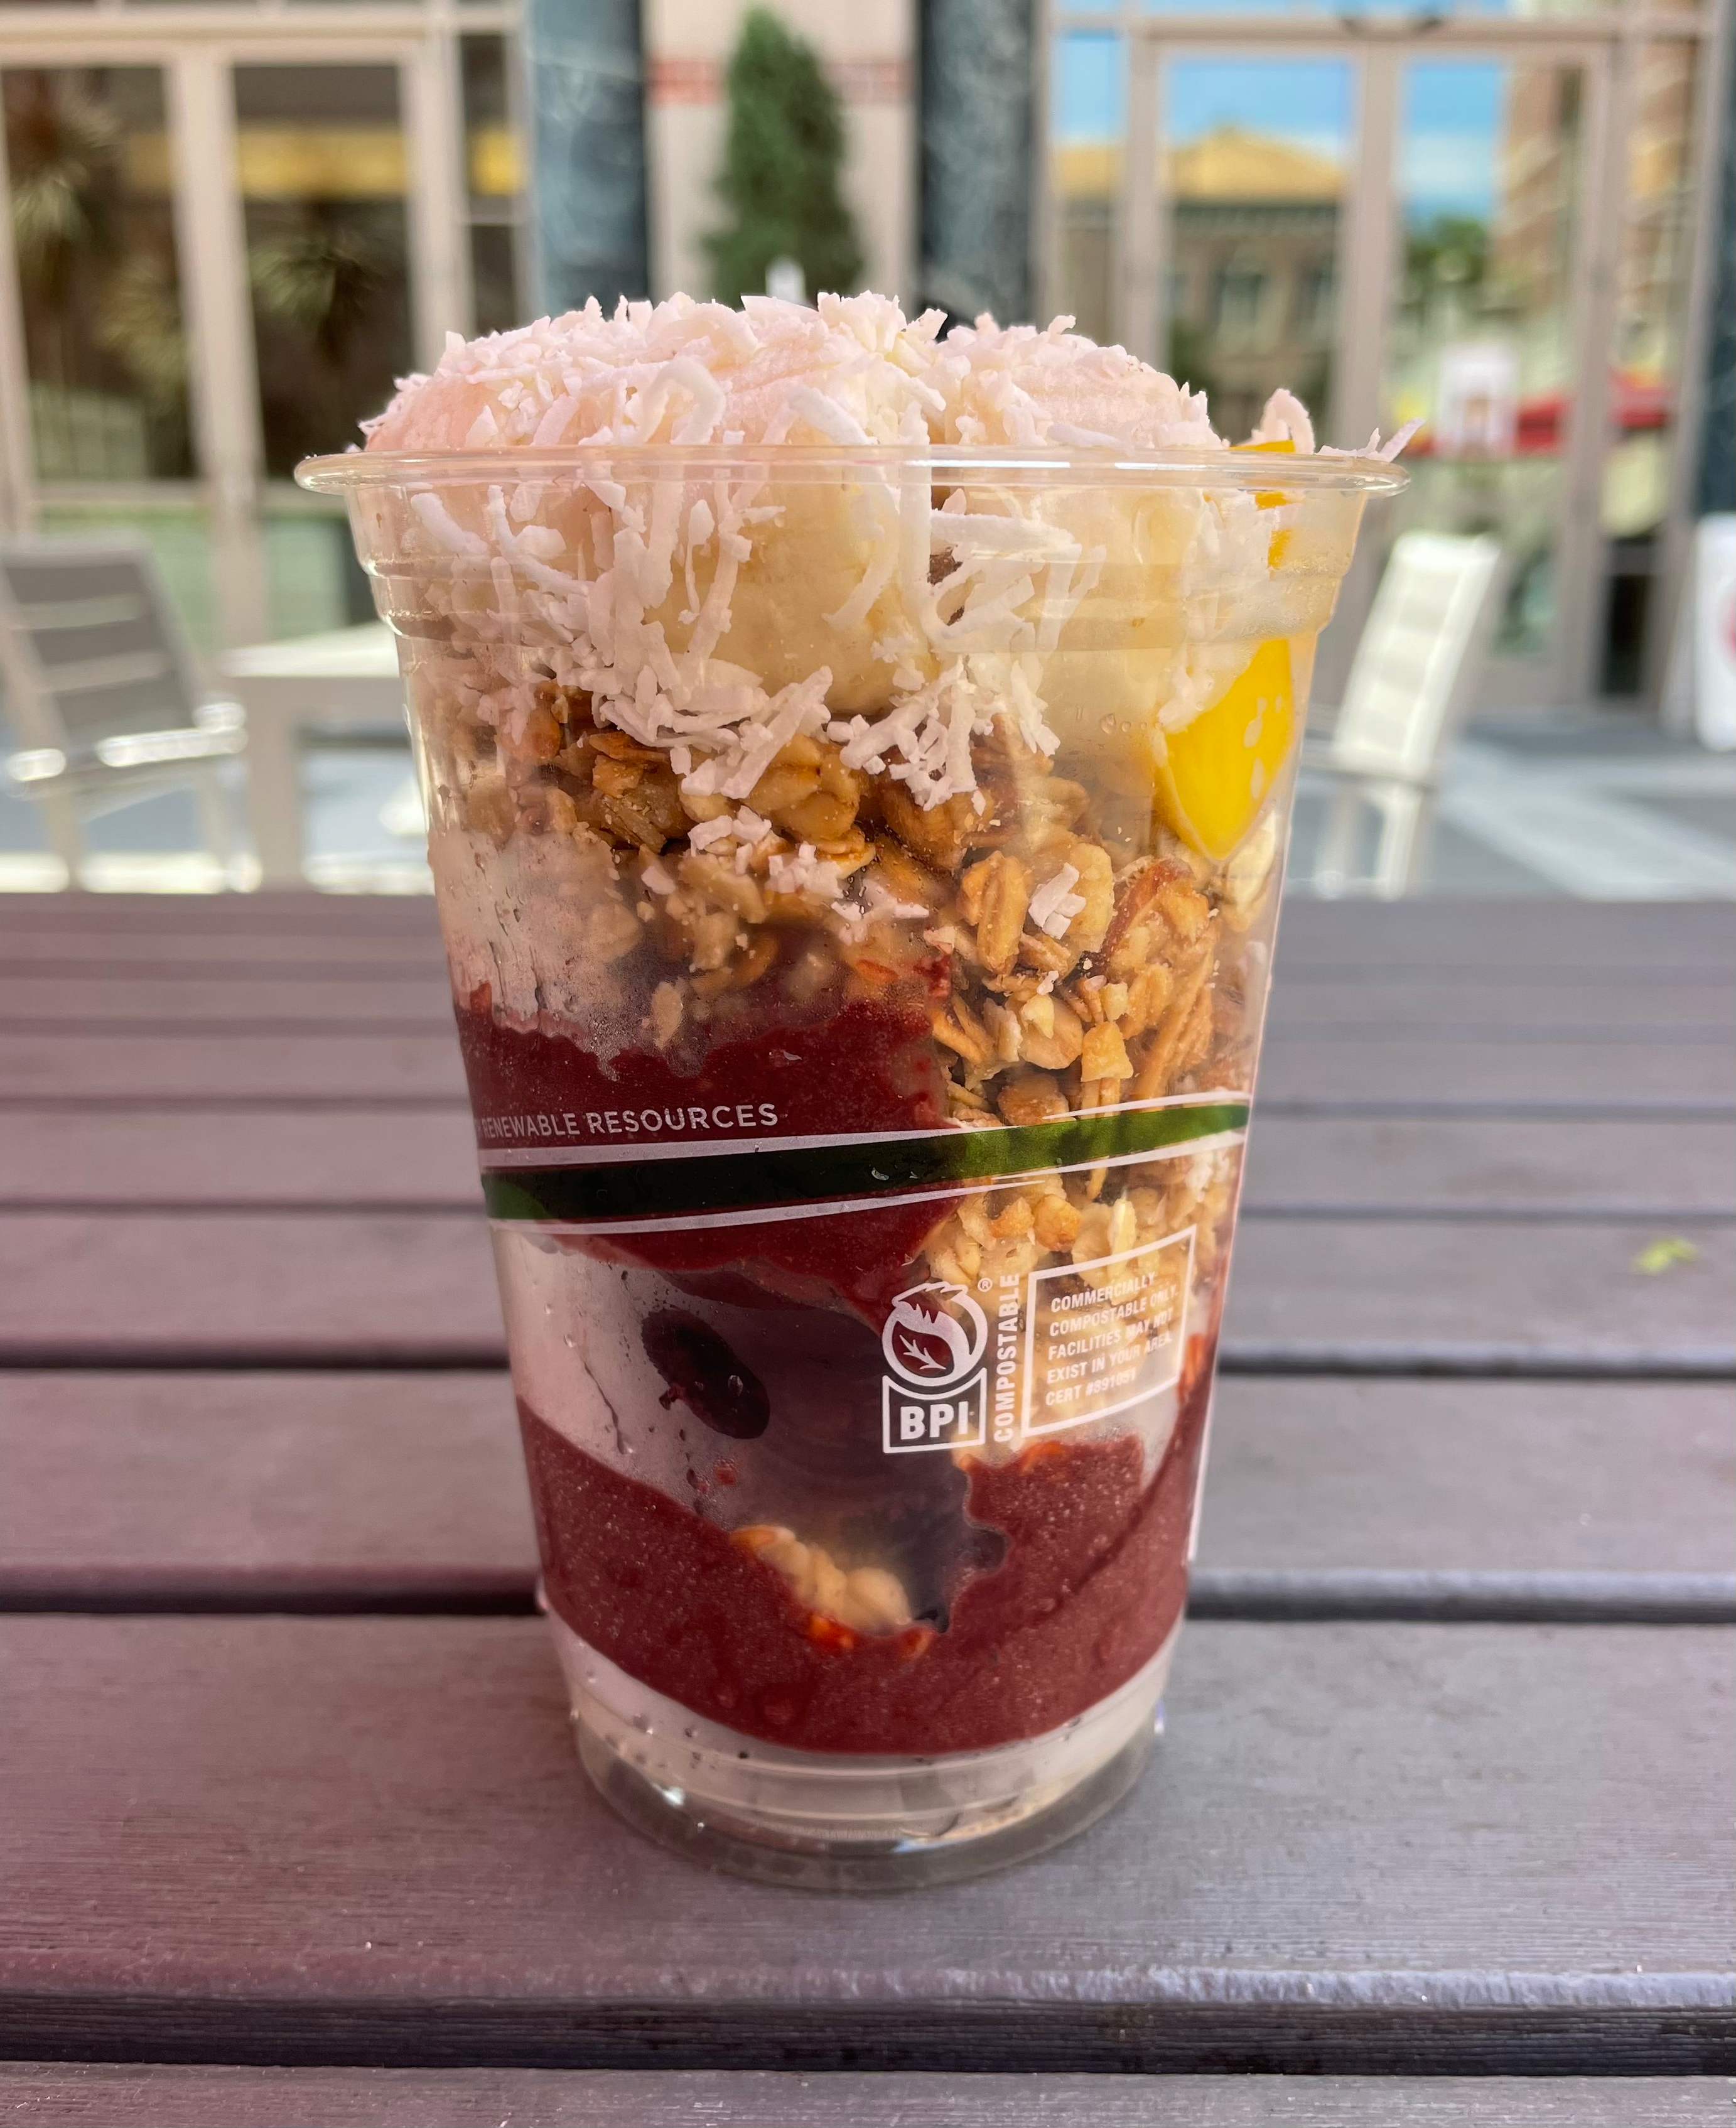 Acai bowl (really, a cup) from C&G Juice